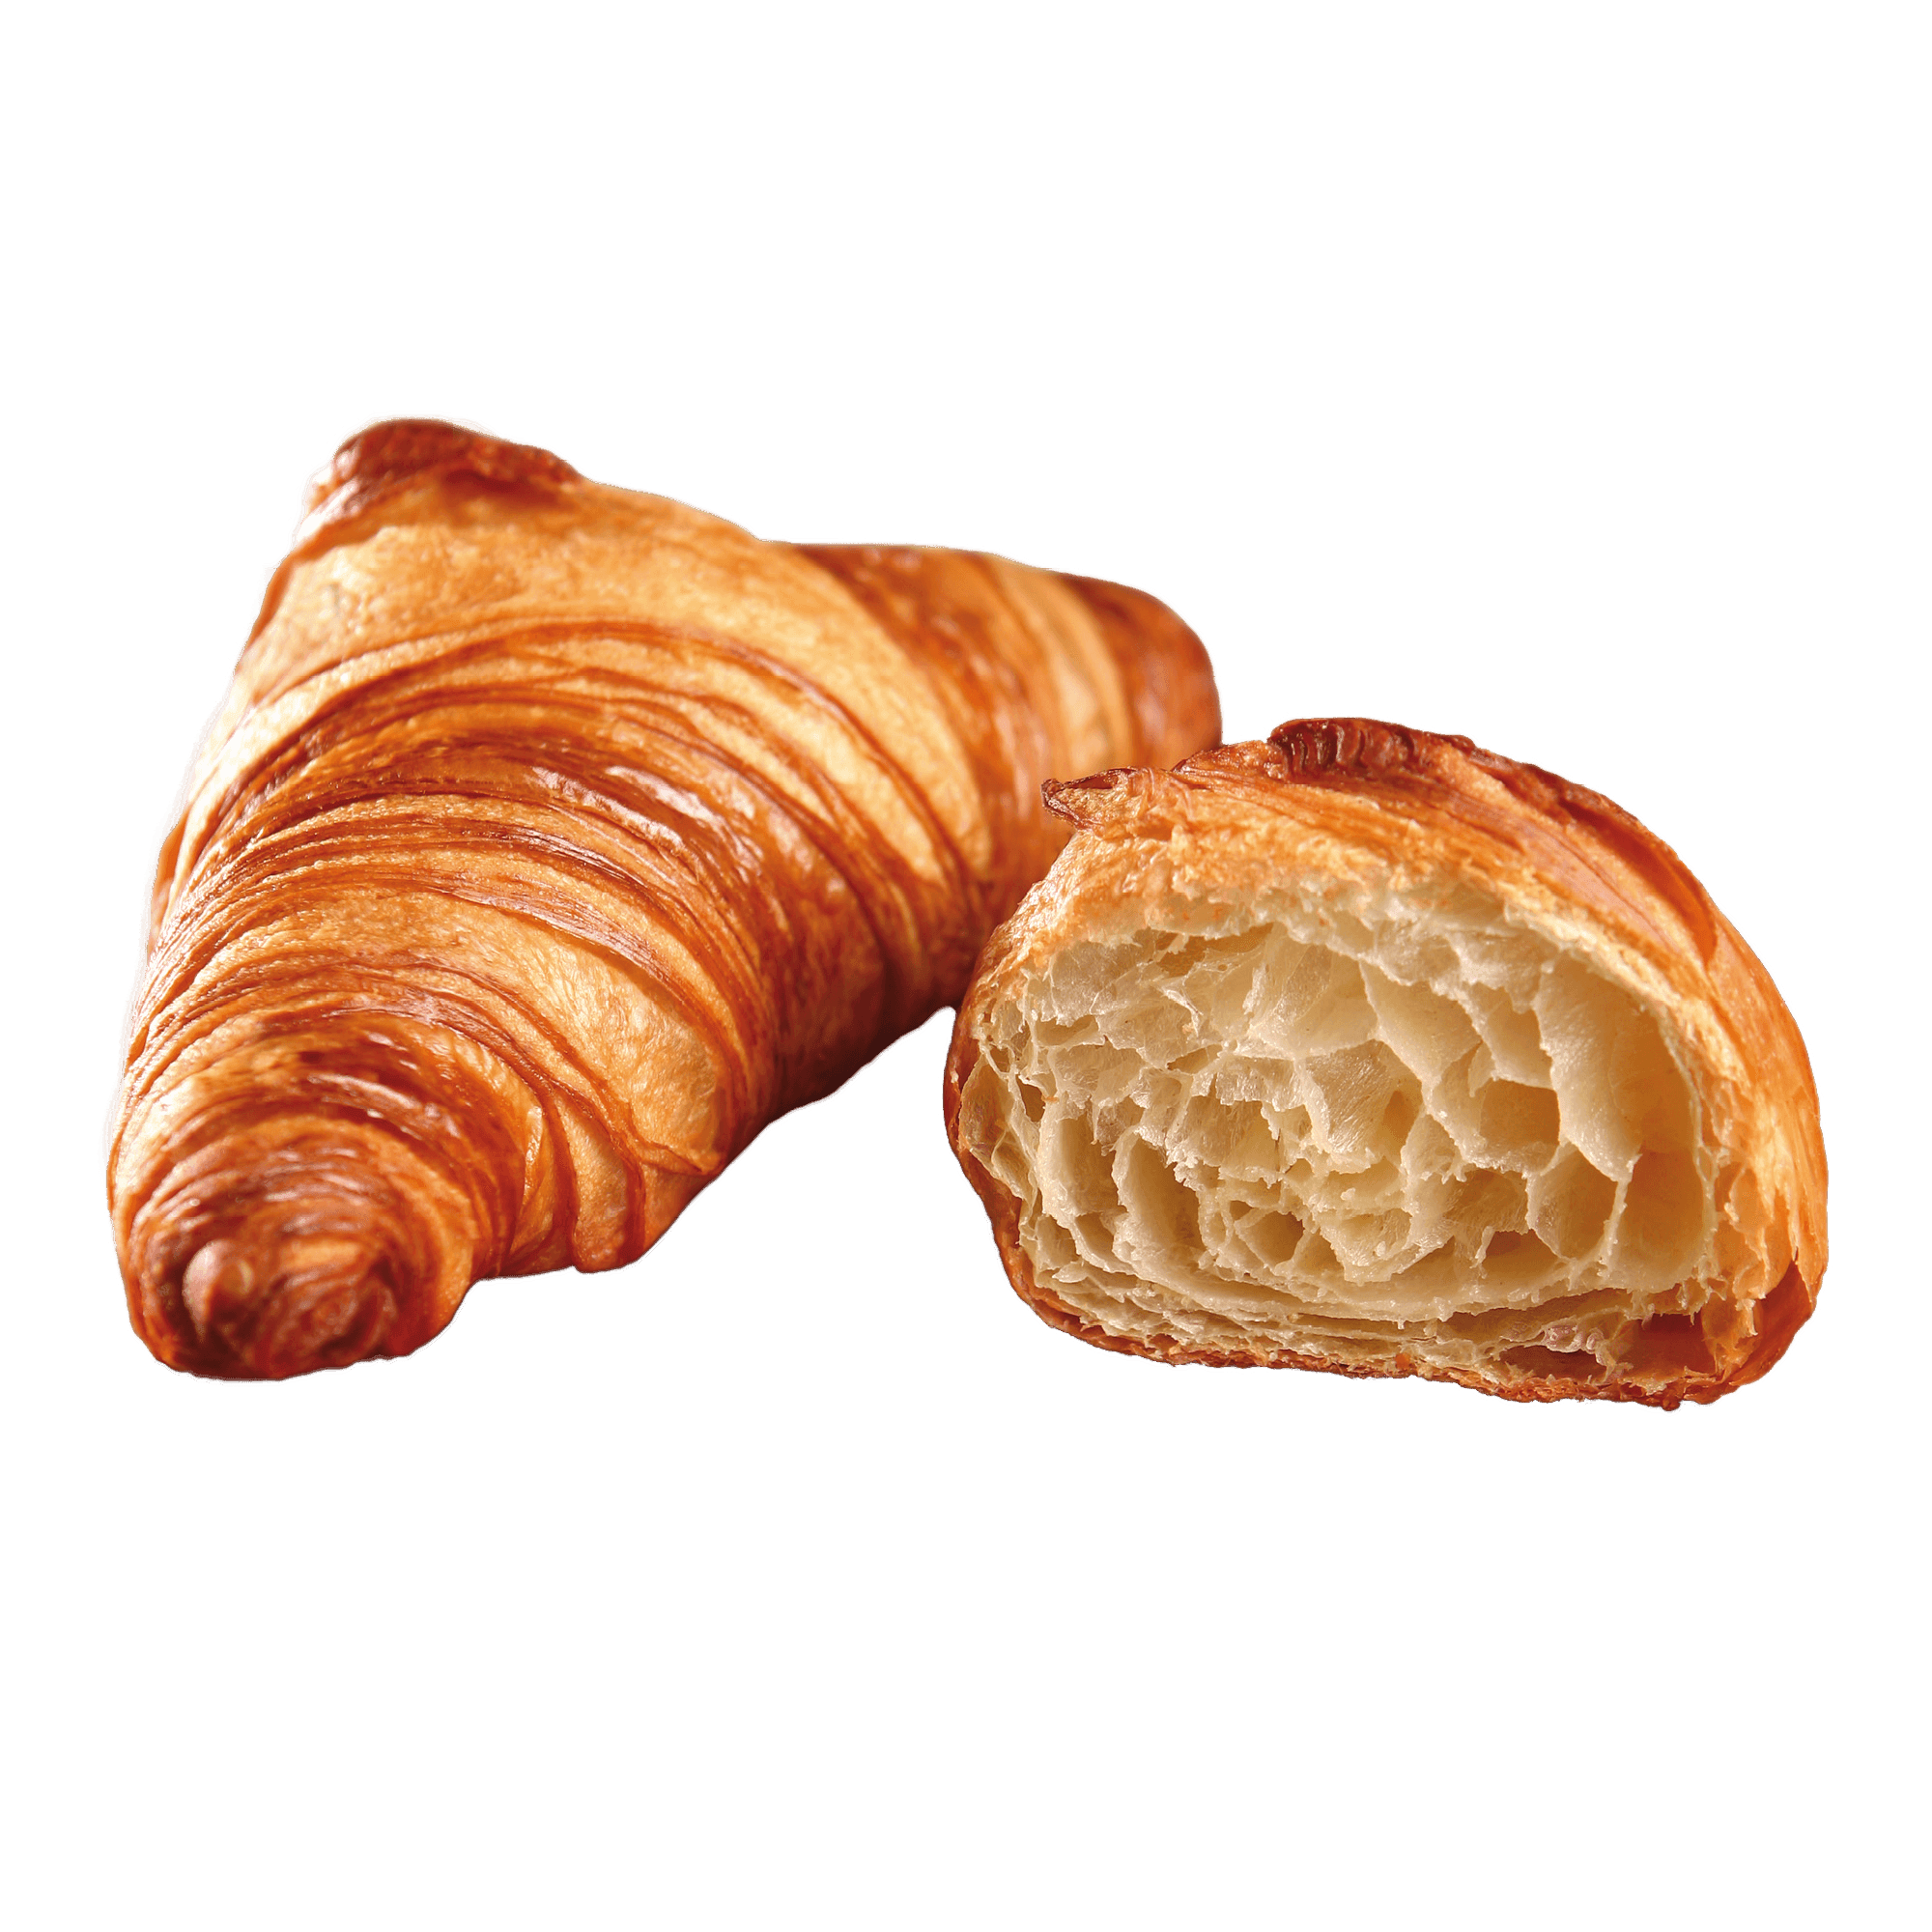 Proof and Bake Croissants - Savory Gourmet